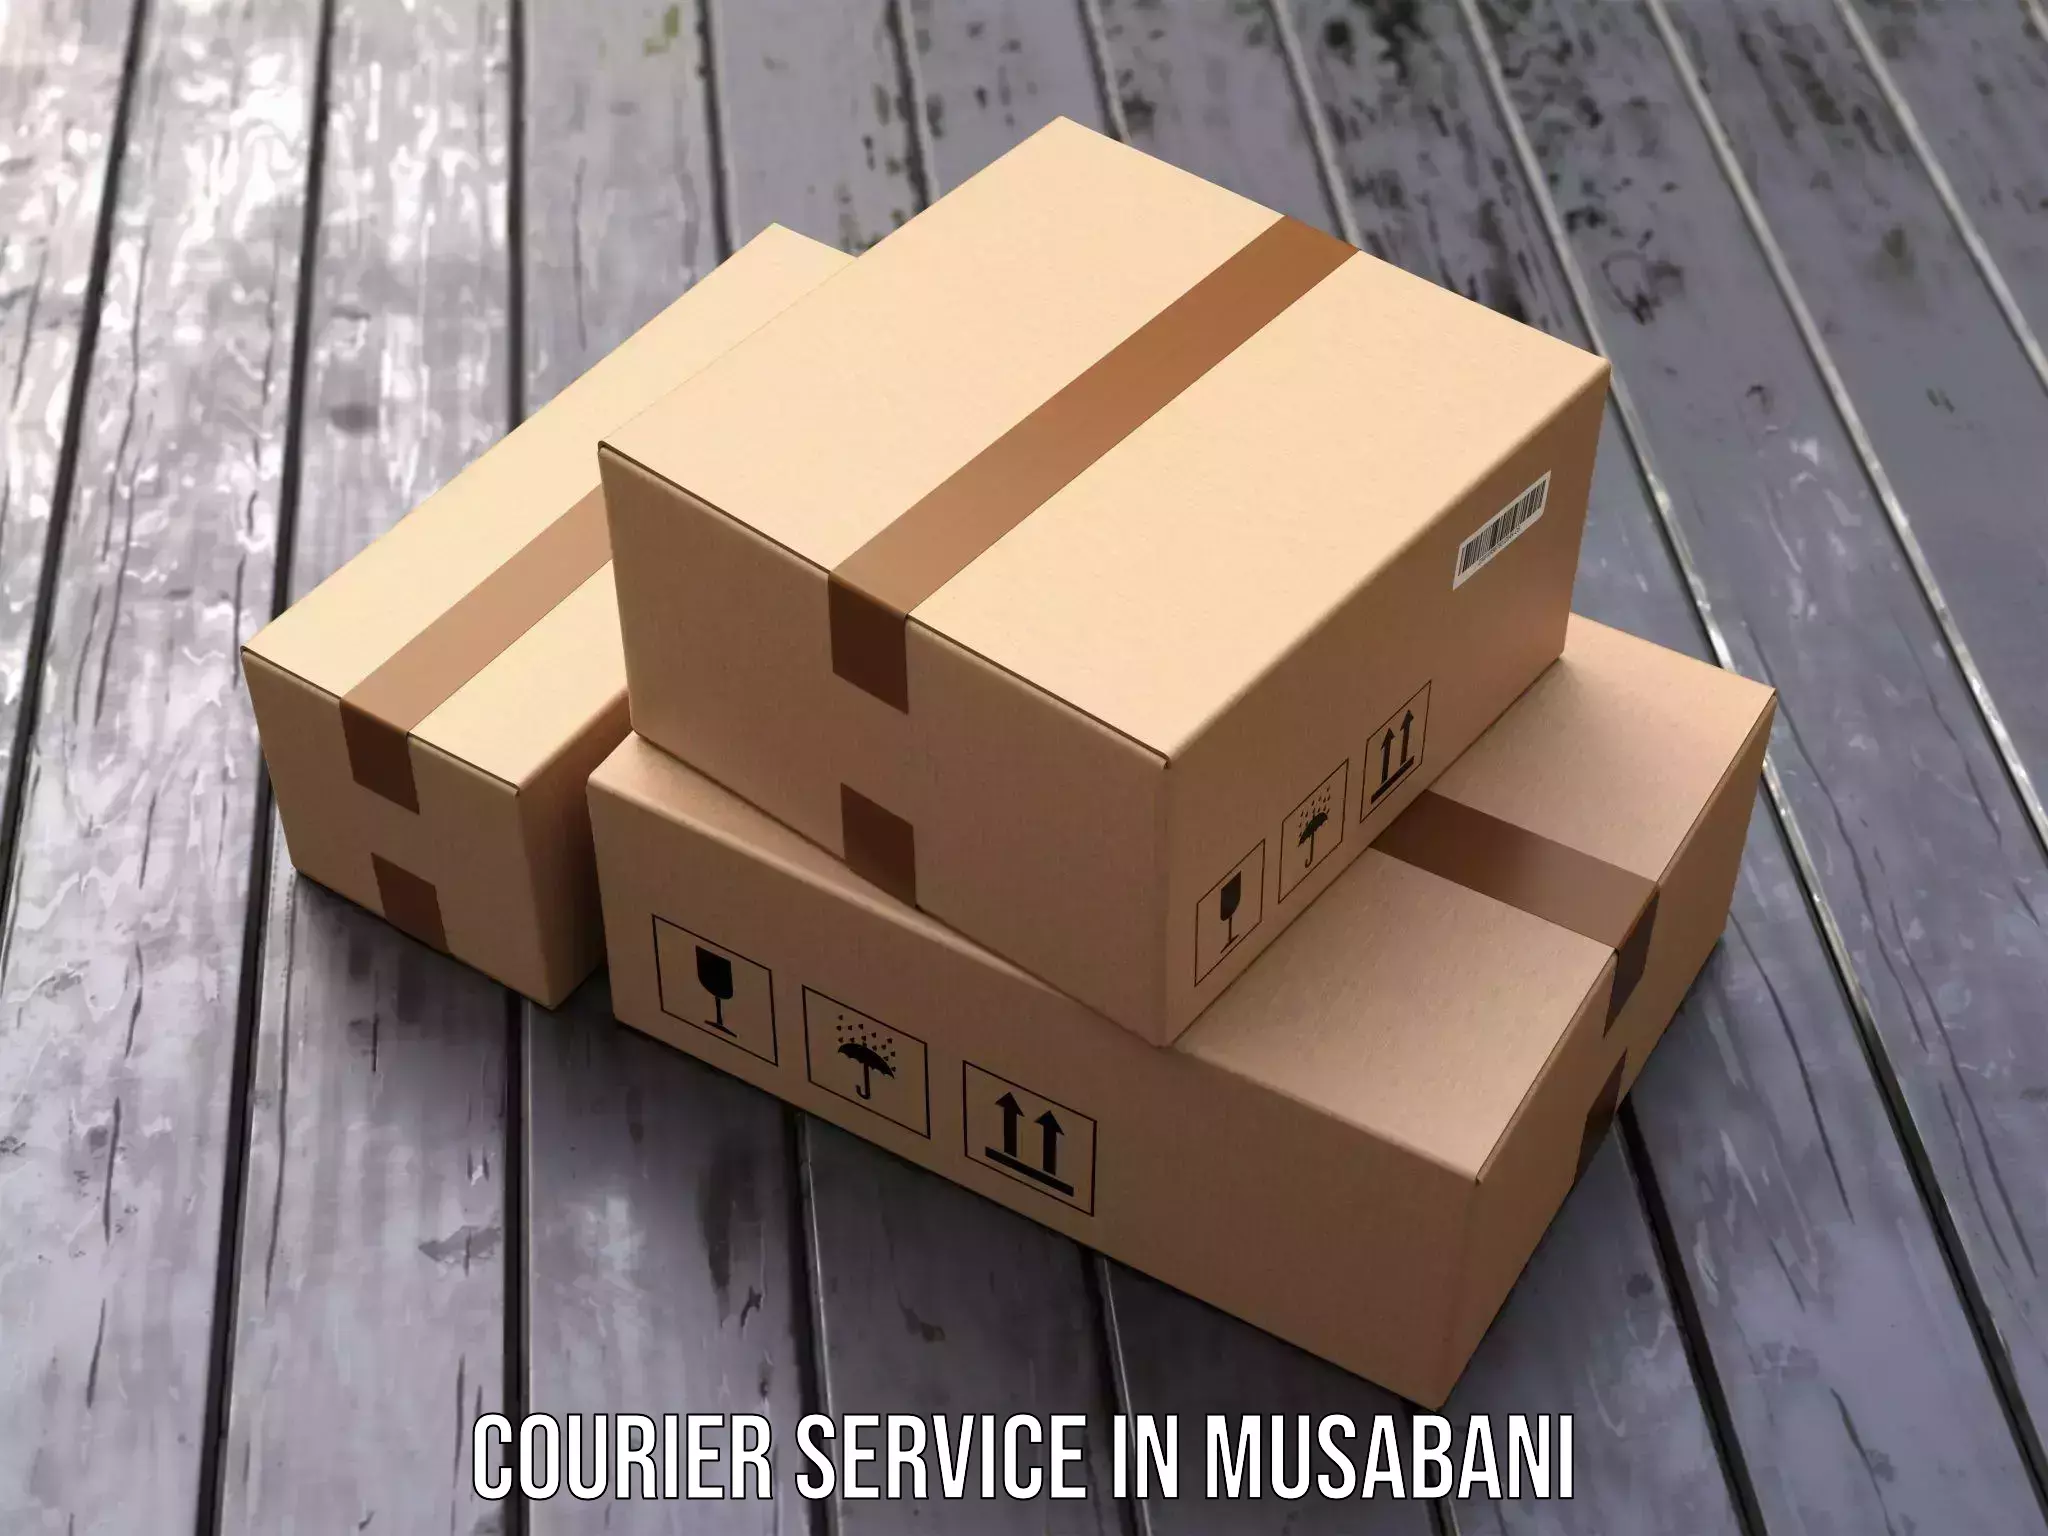 Small parcel delivery in Musabani